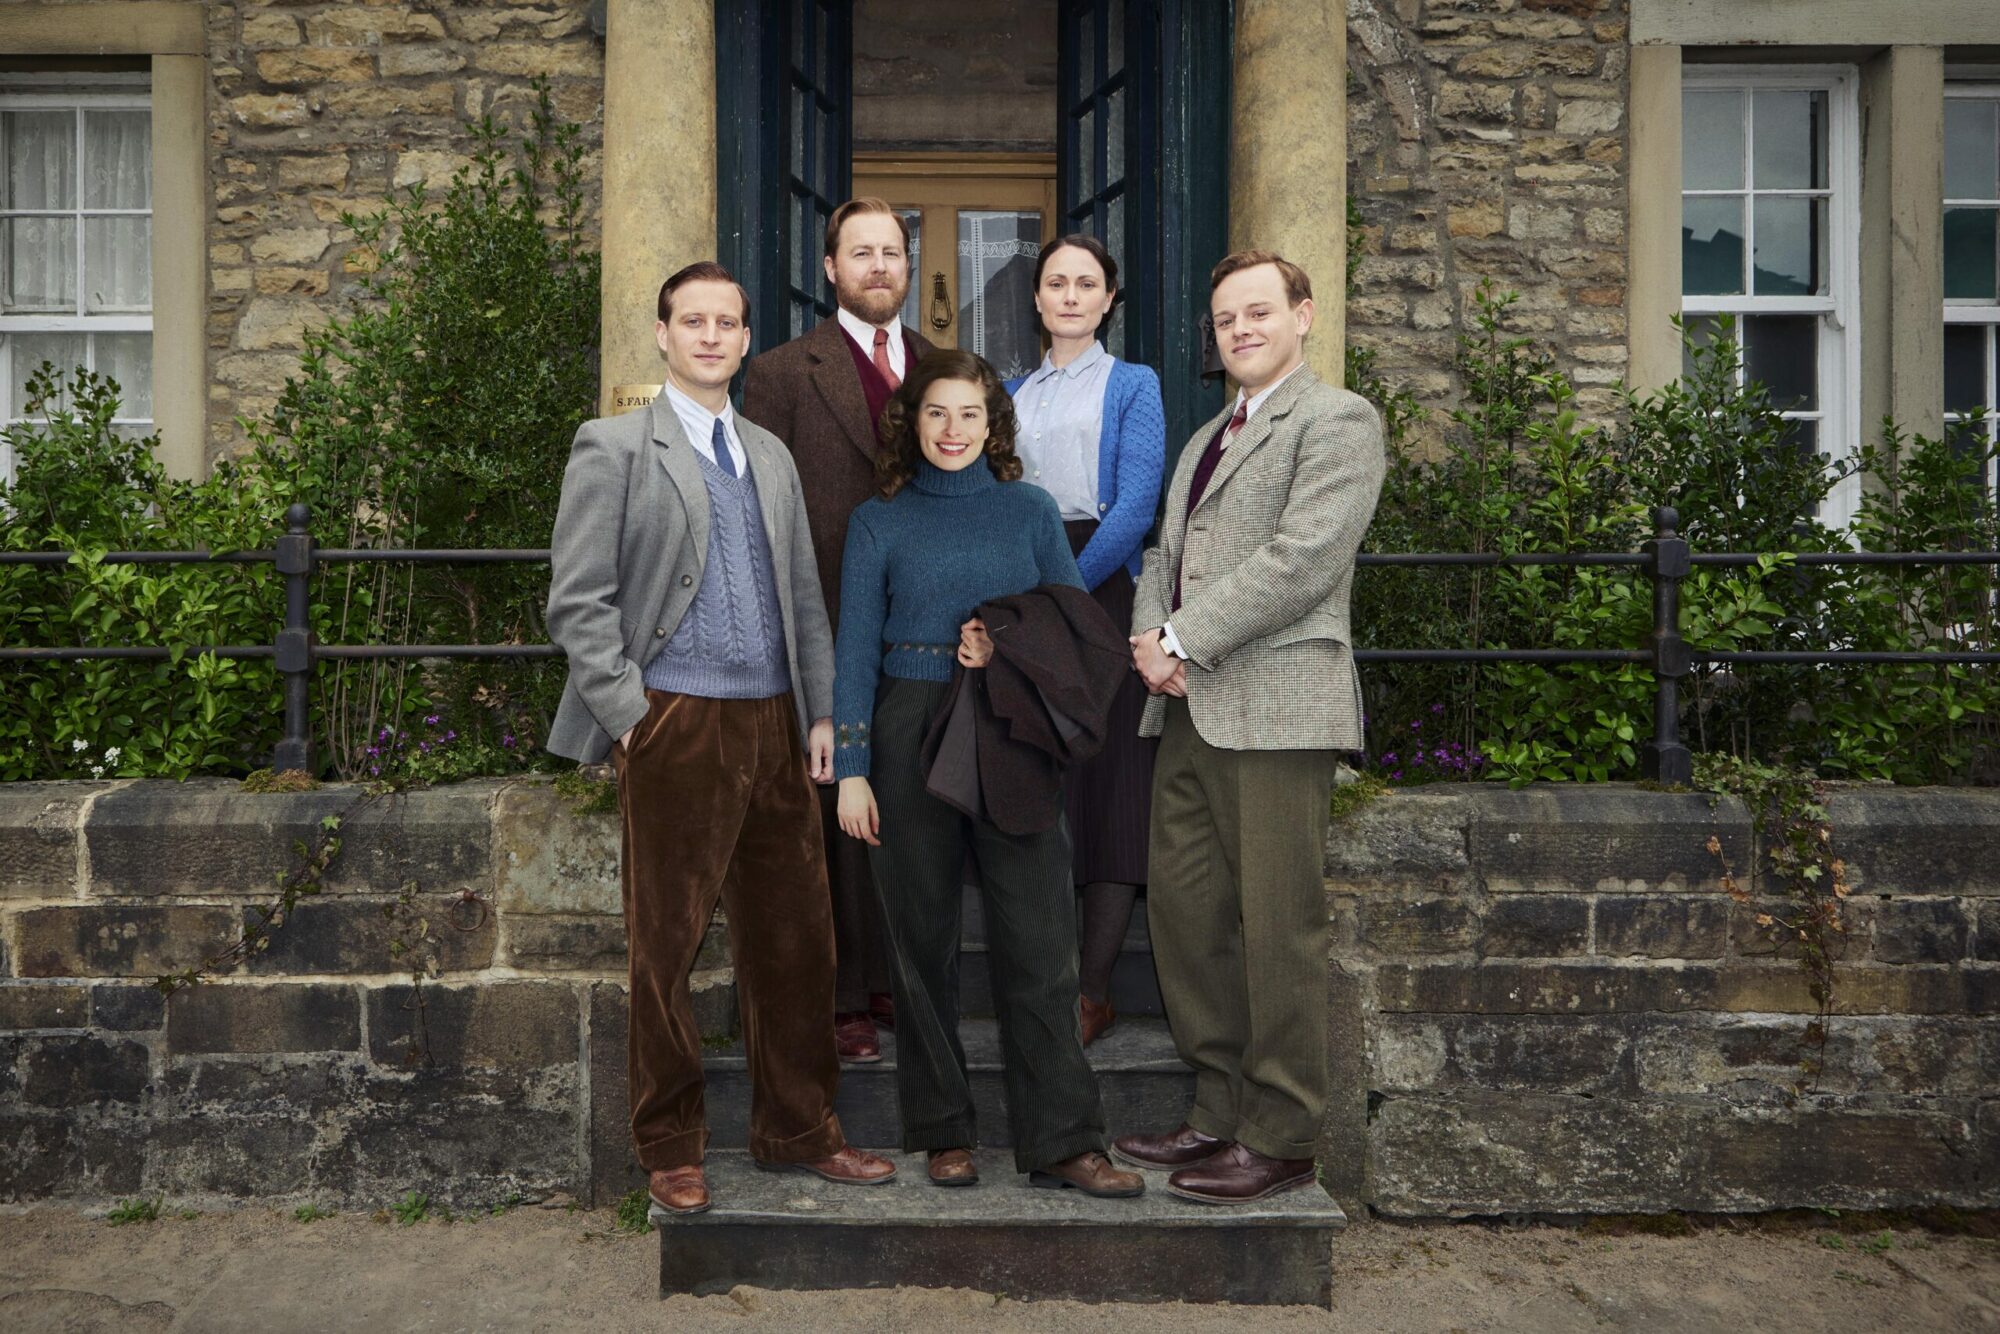 Image name FIRST LOOK 3 All Creatures Great and Small S3 Group Shot outside Skeldale L R James Siegfried Helen Mrs Hall Tristan scaled 1 the 7 image from the post All Creatures Great & Small Returns to UK Screens on Thursday 15th September 2022 in Yorkshire.com.